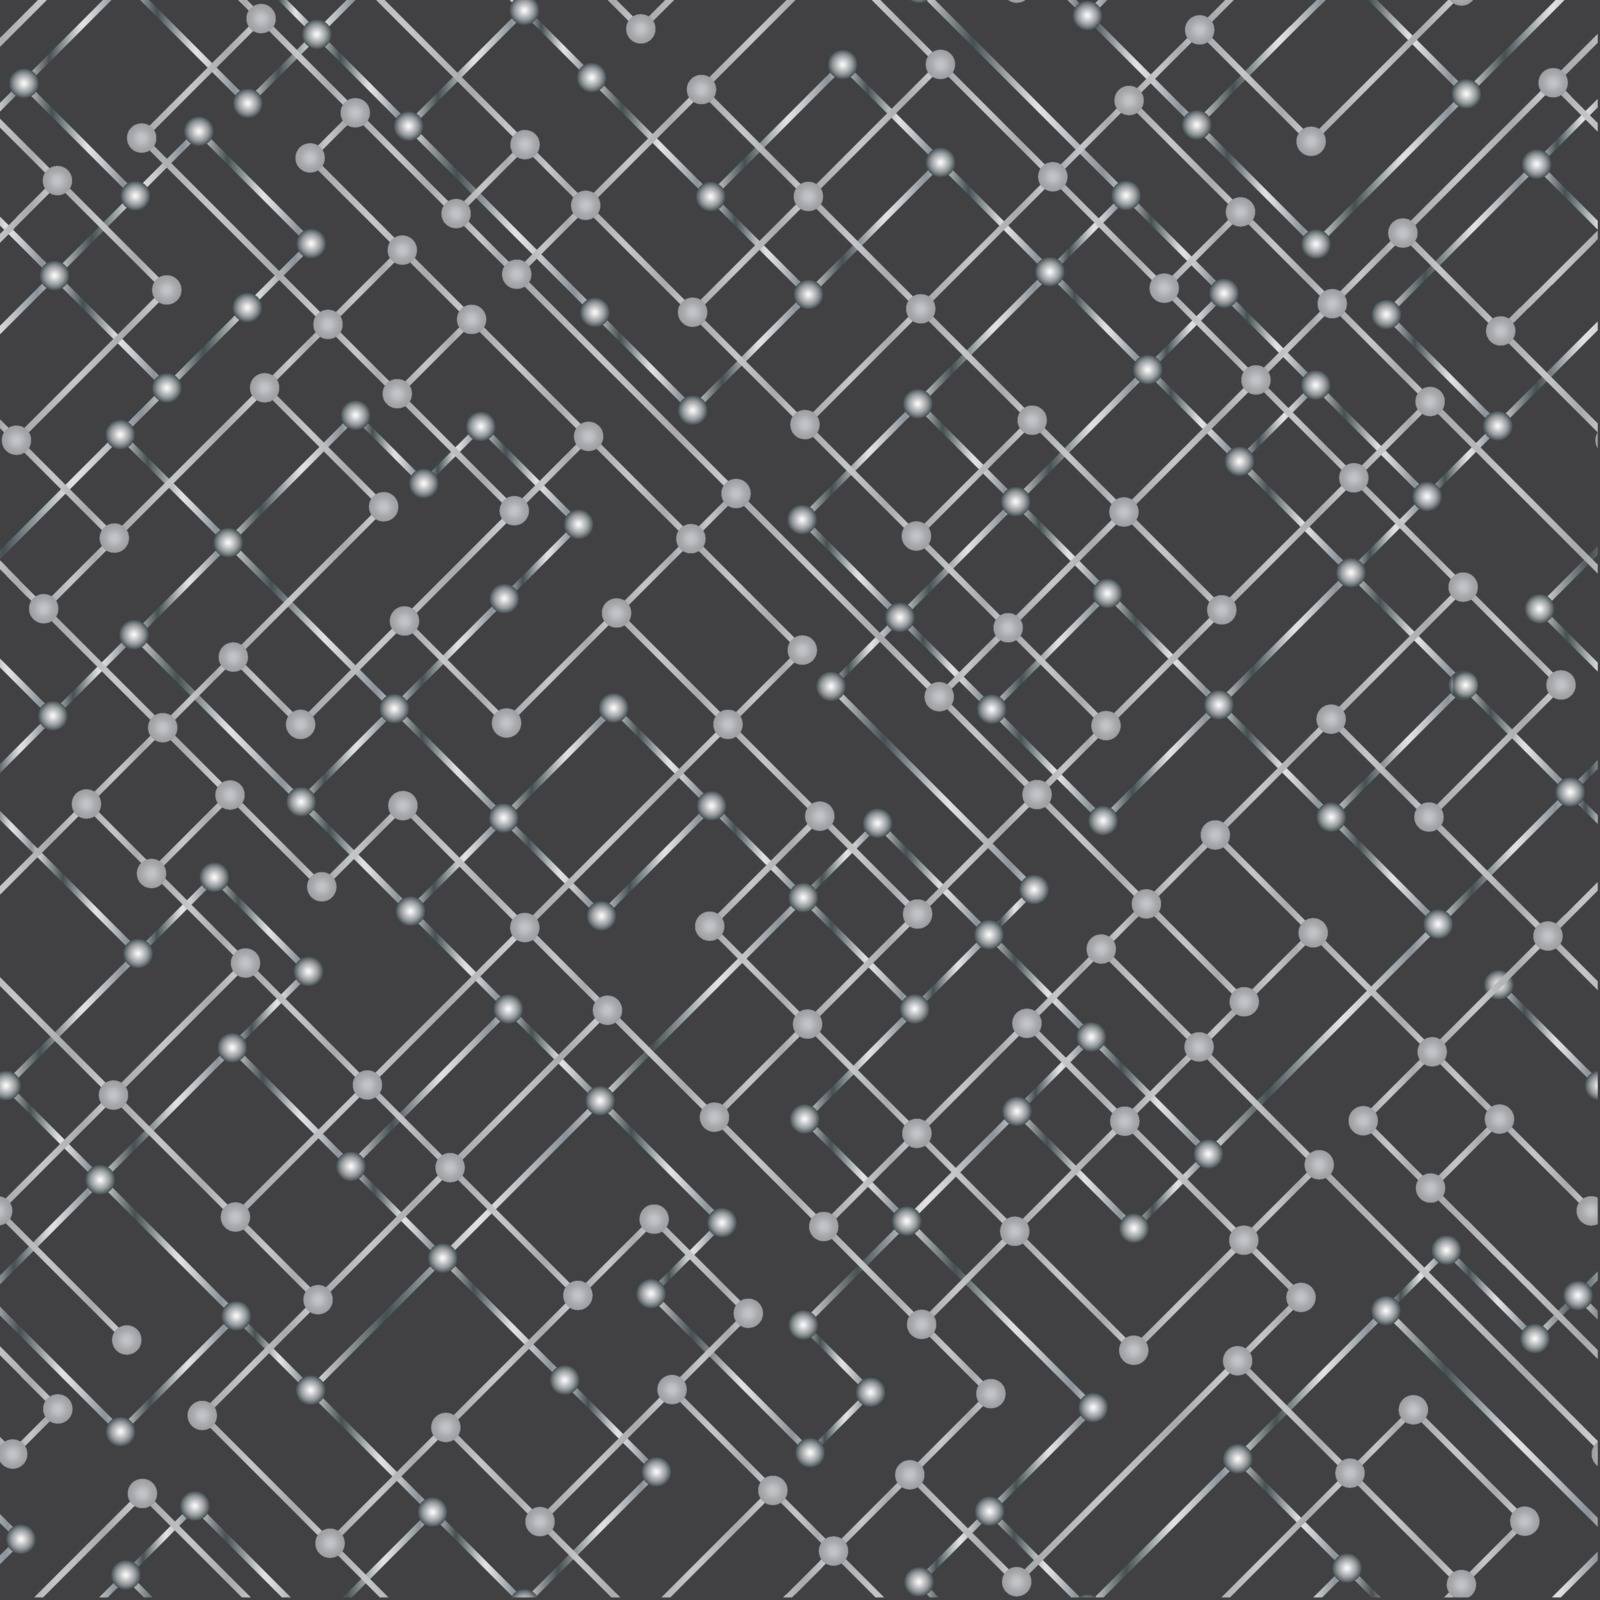 Messy connected dots seamless background. Wallpaper created from different small triangles created from connected dots. Molecular chaotic background. Seamless pattern.